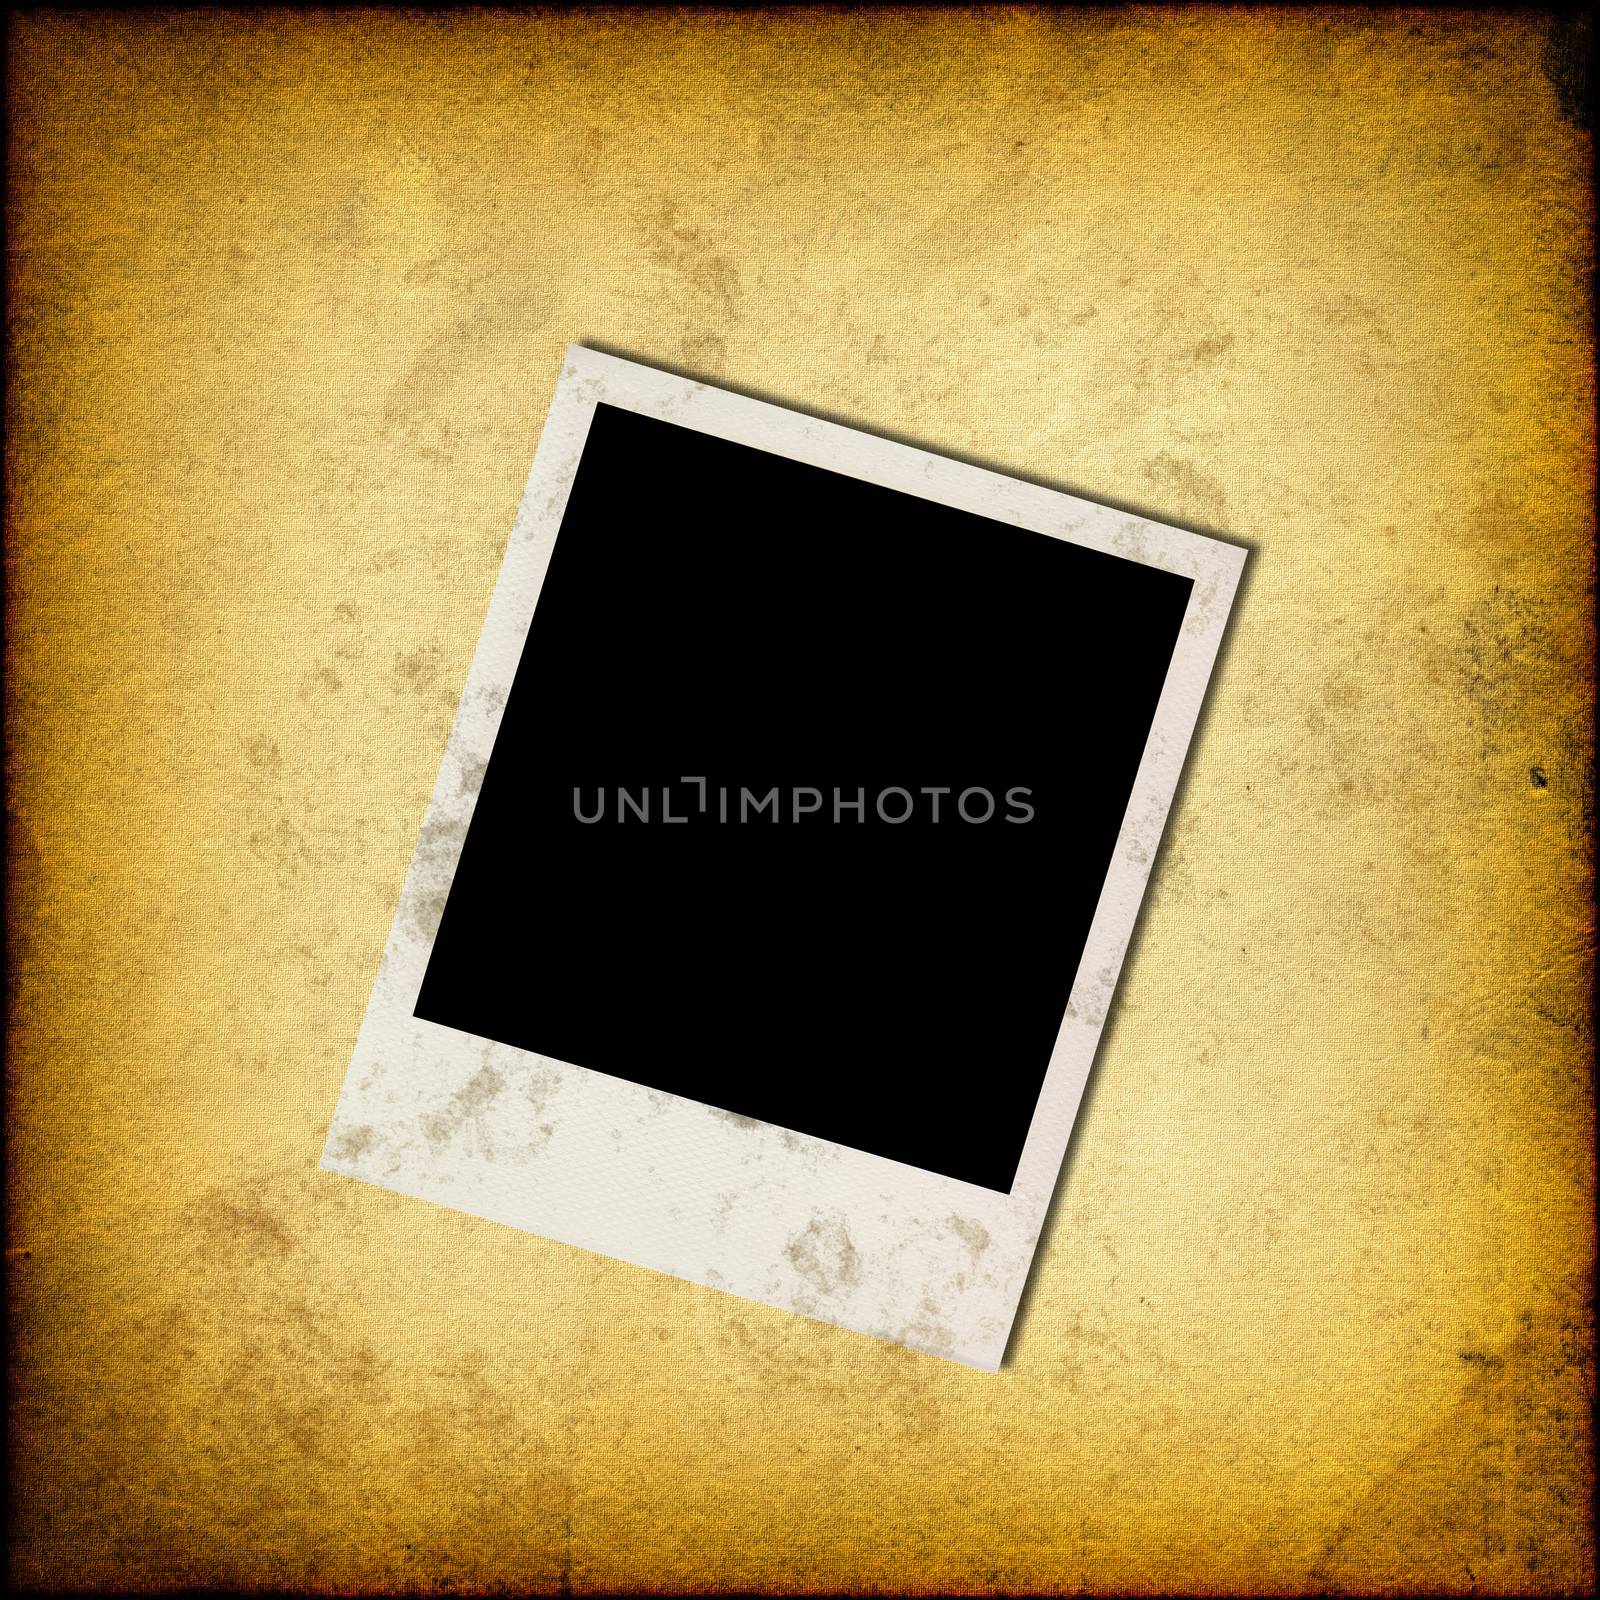 Blank instant photo frame on old grunge paper background by Attila